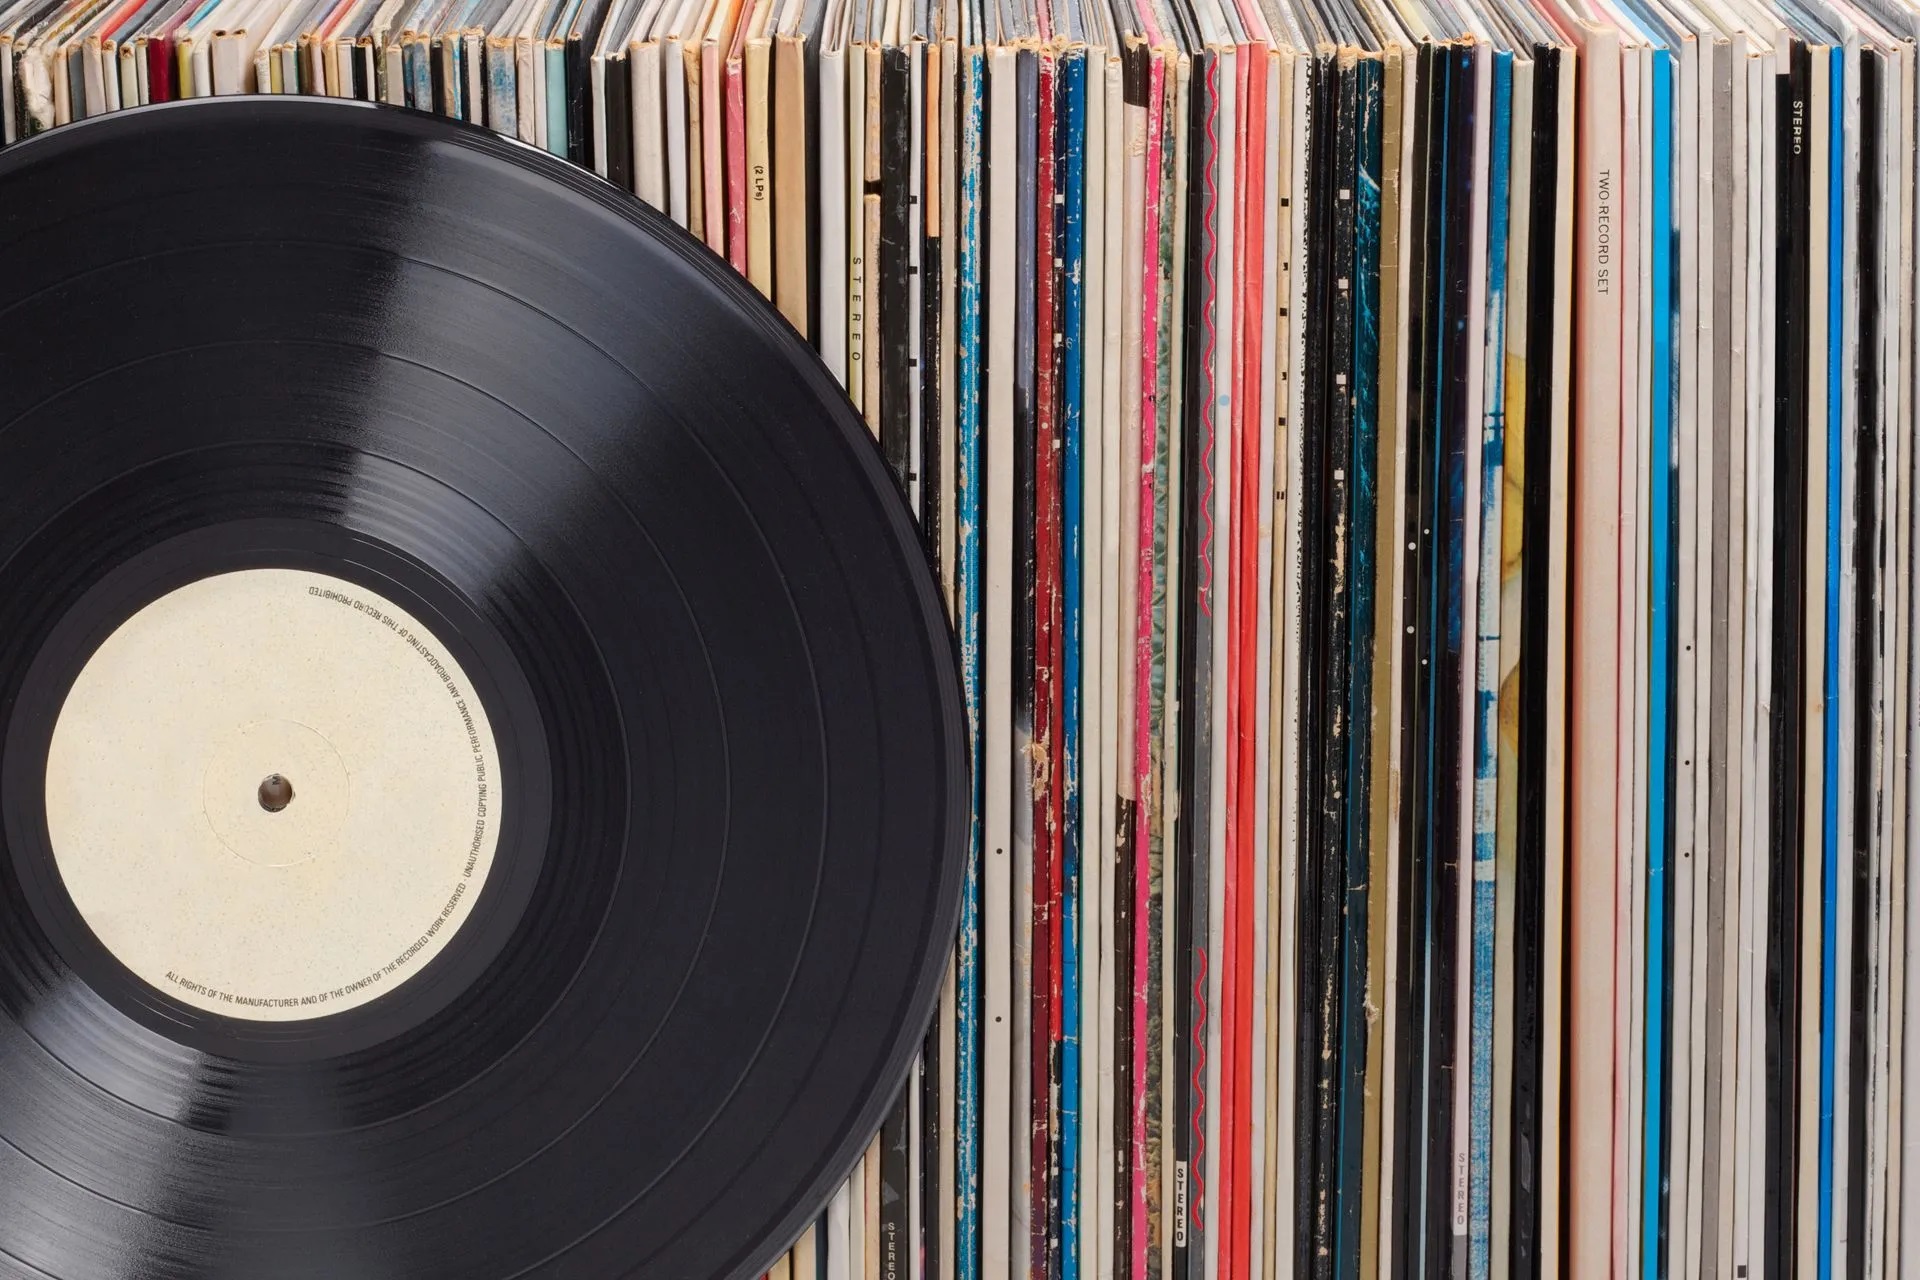 Image of vinyl records stacked together